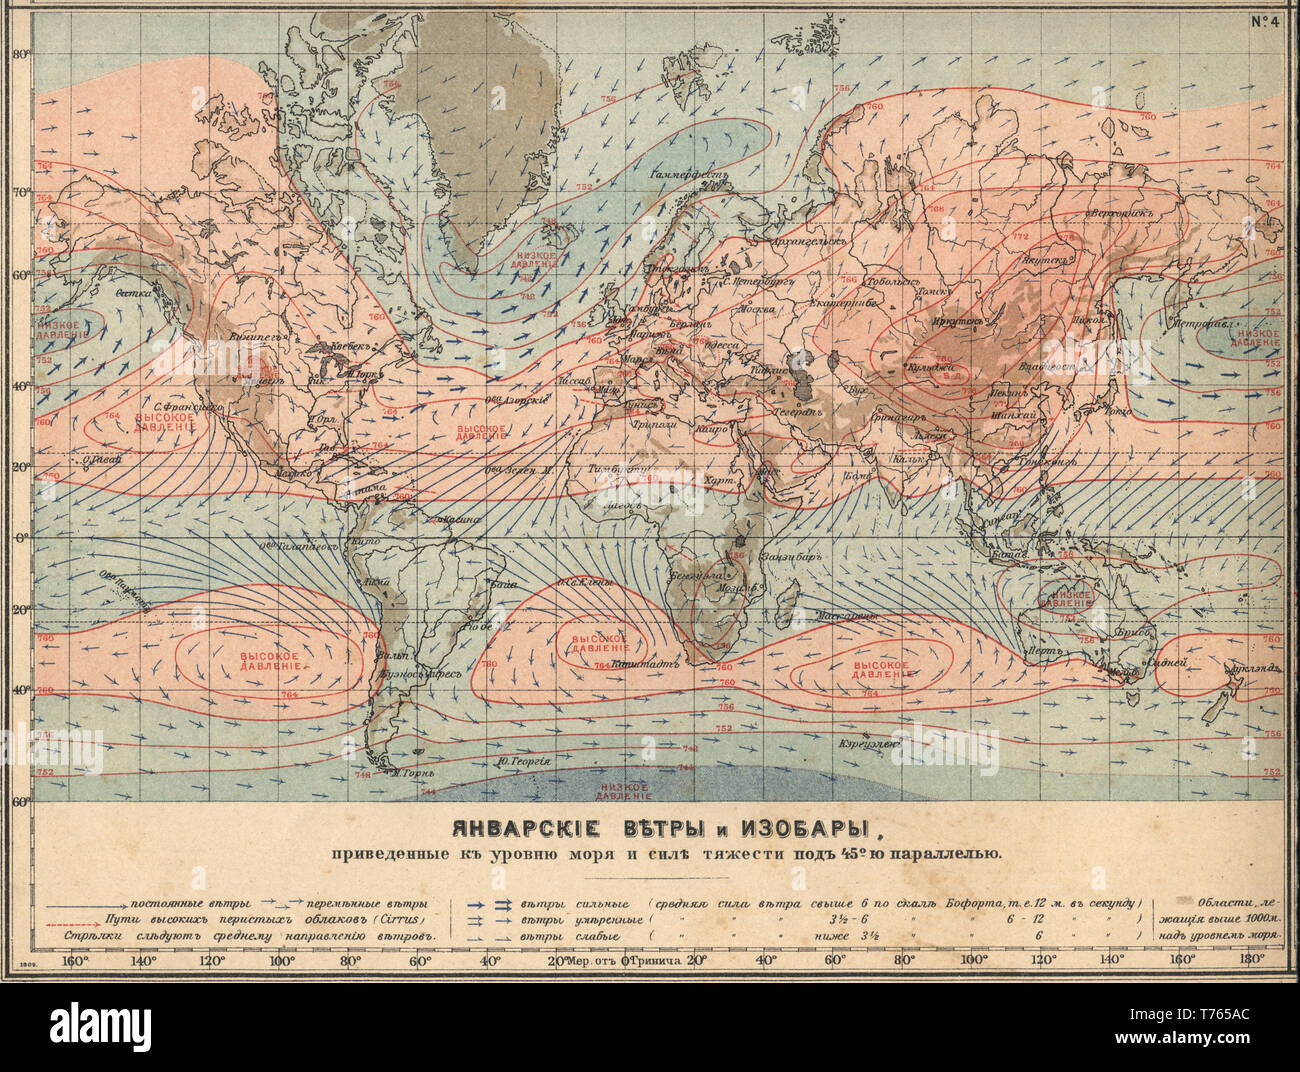 Earth Climatology Maps January winds and isobars New table atlas A.F. Marcks St. Petersburg, 1910 Stock Photo